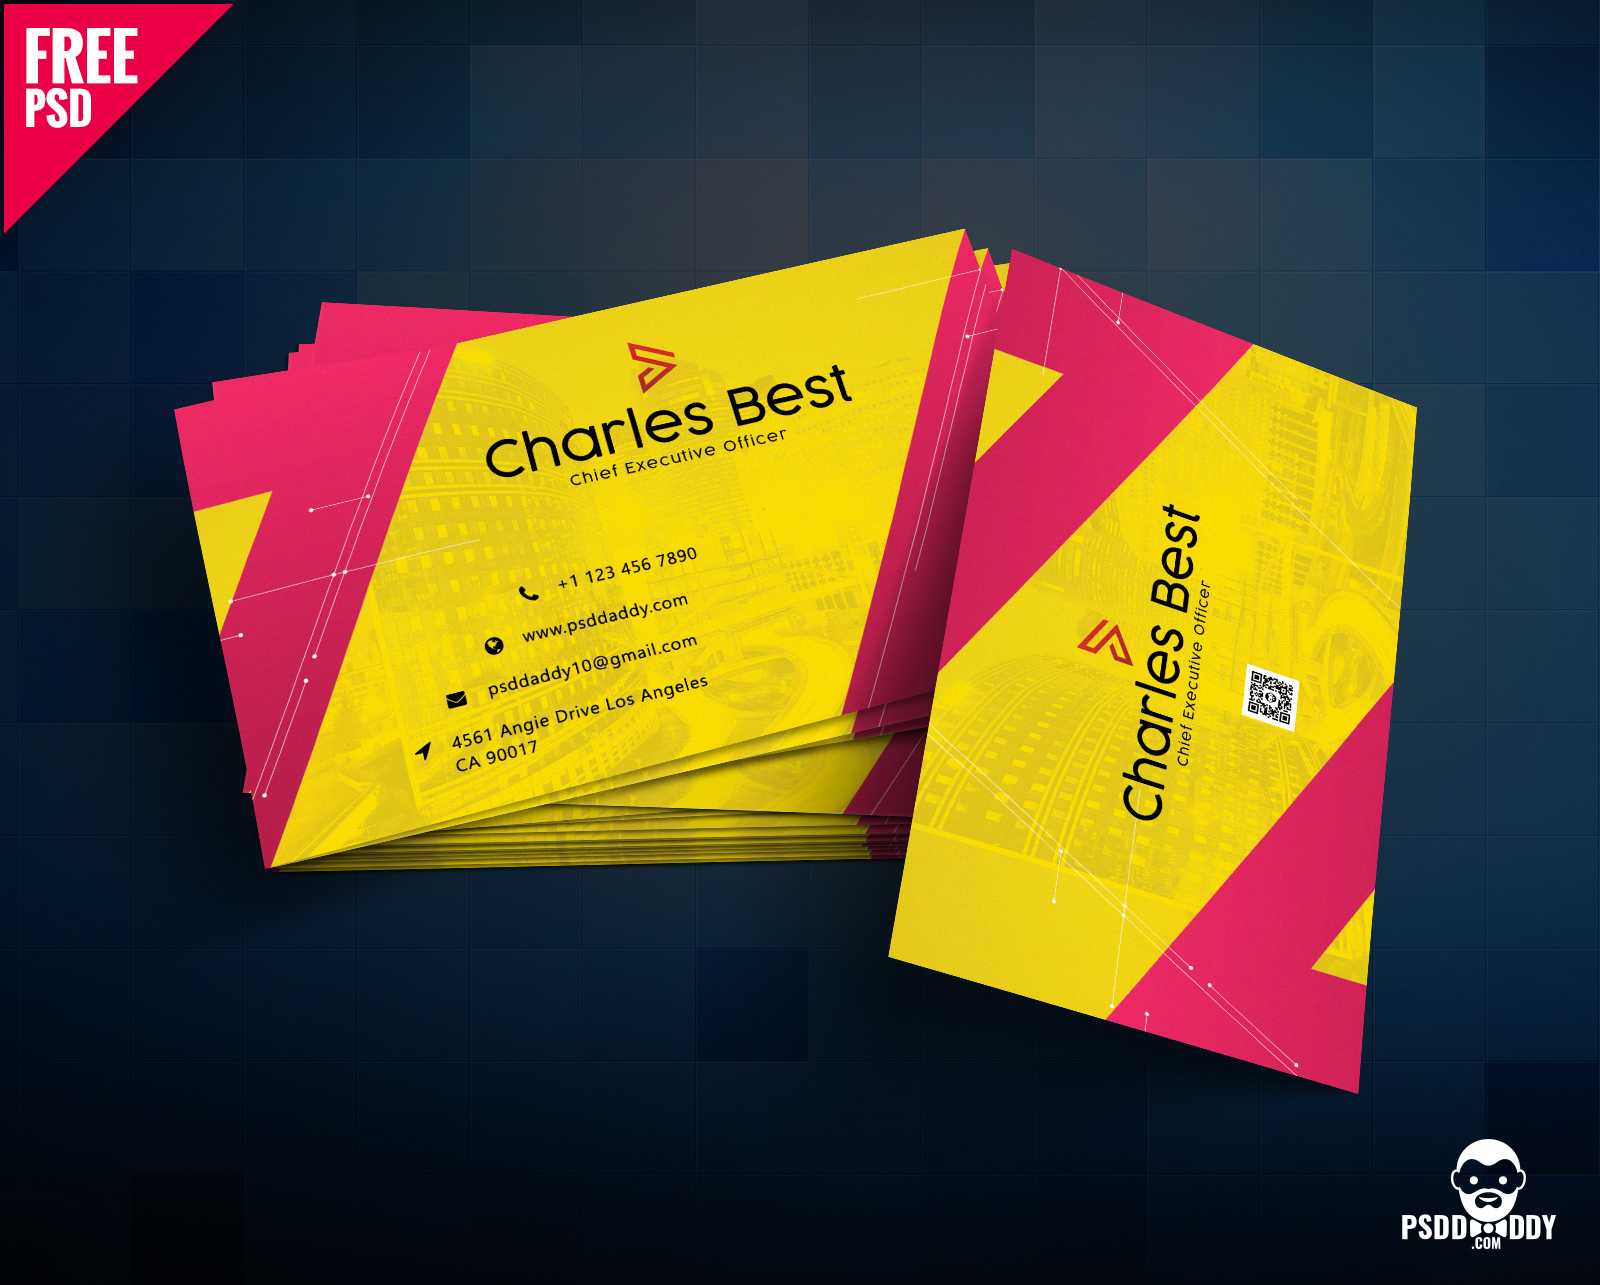 Download] Creative Business Card Free Psd | Psddaddy Regarding Visiting Card Templates For Photoshop